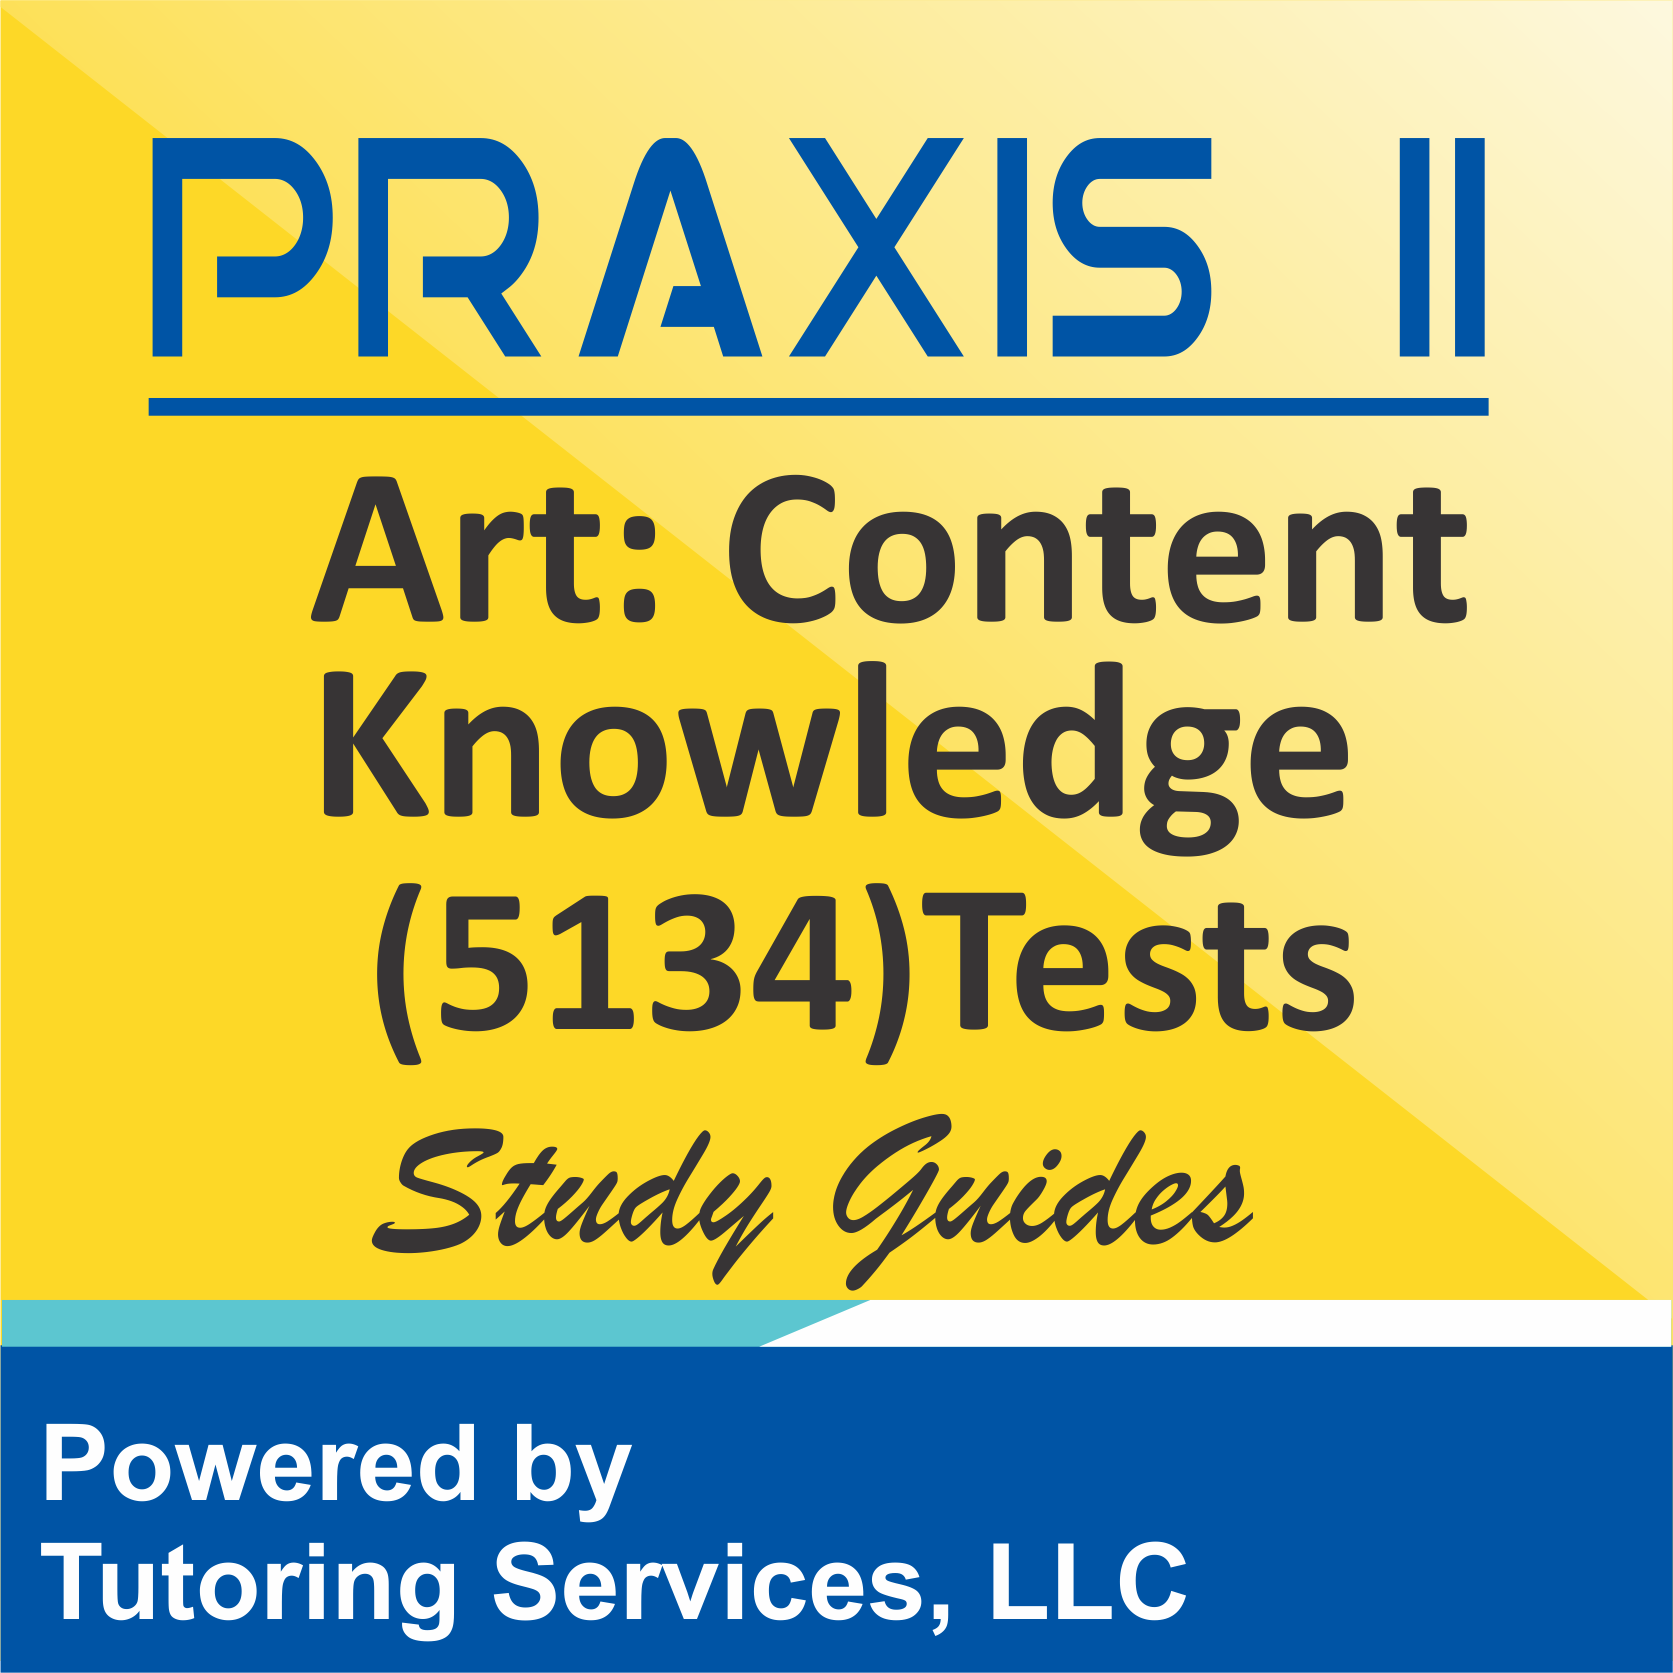 Praxis II Art: Content Knowledge (5134) Examination About